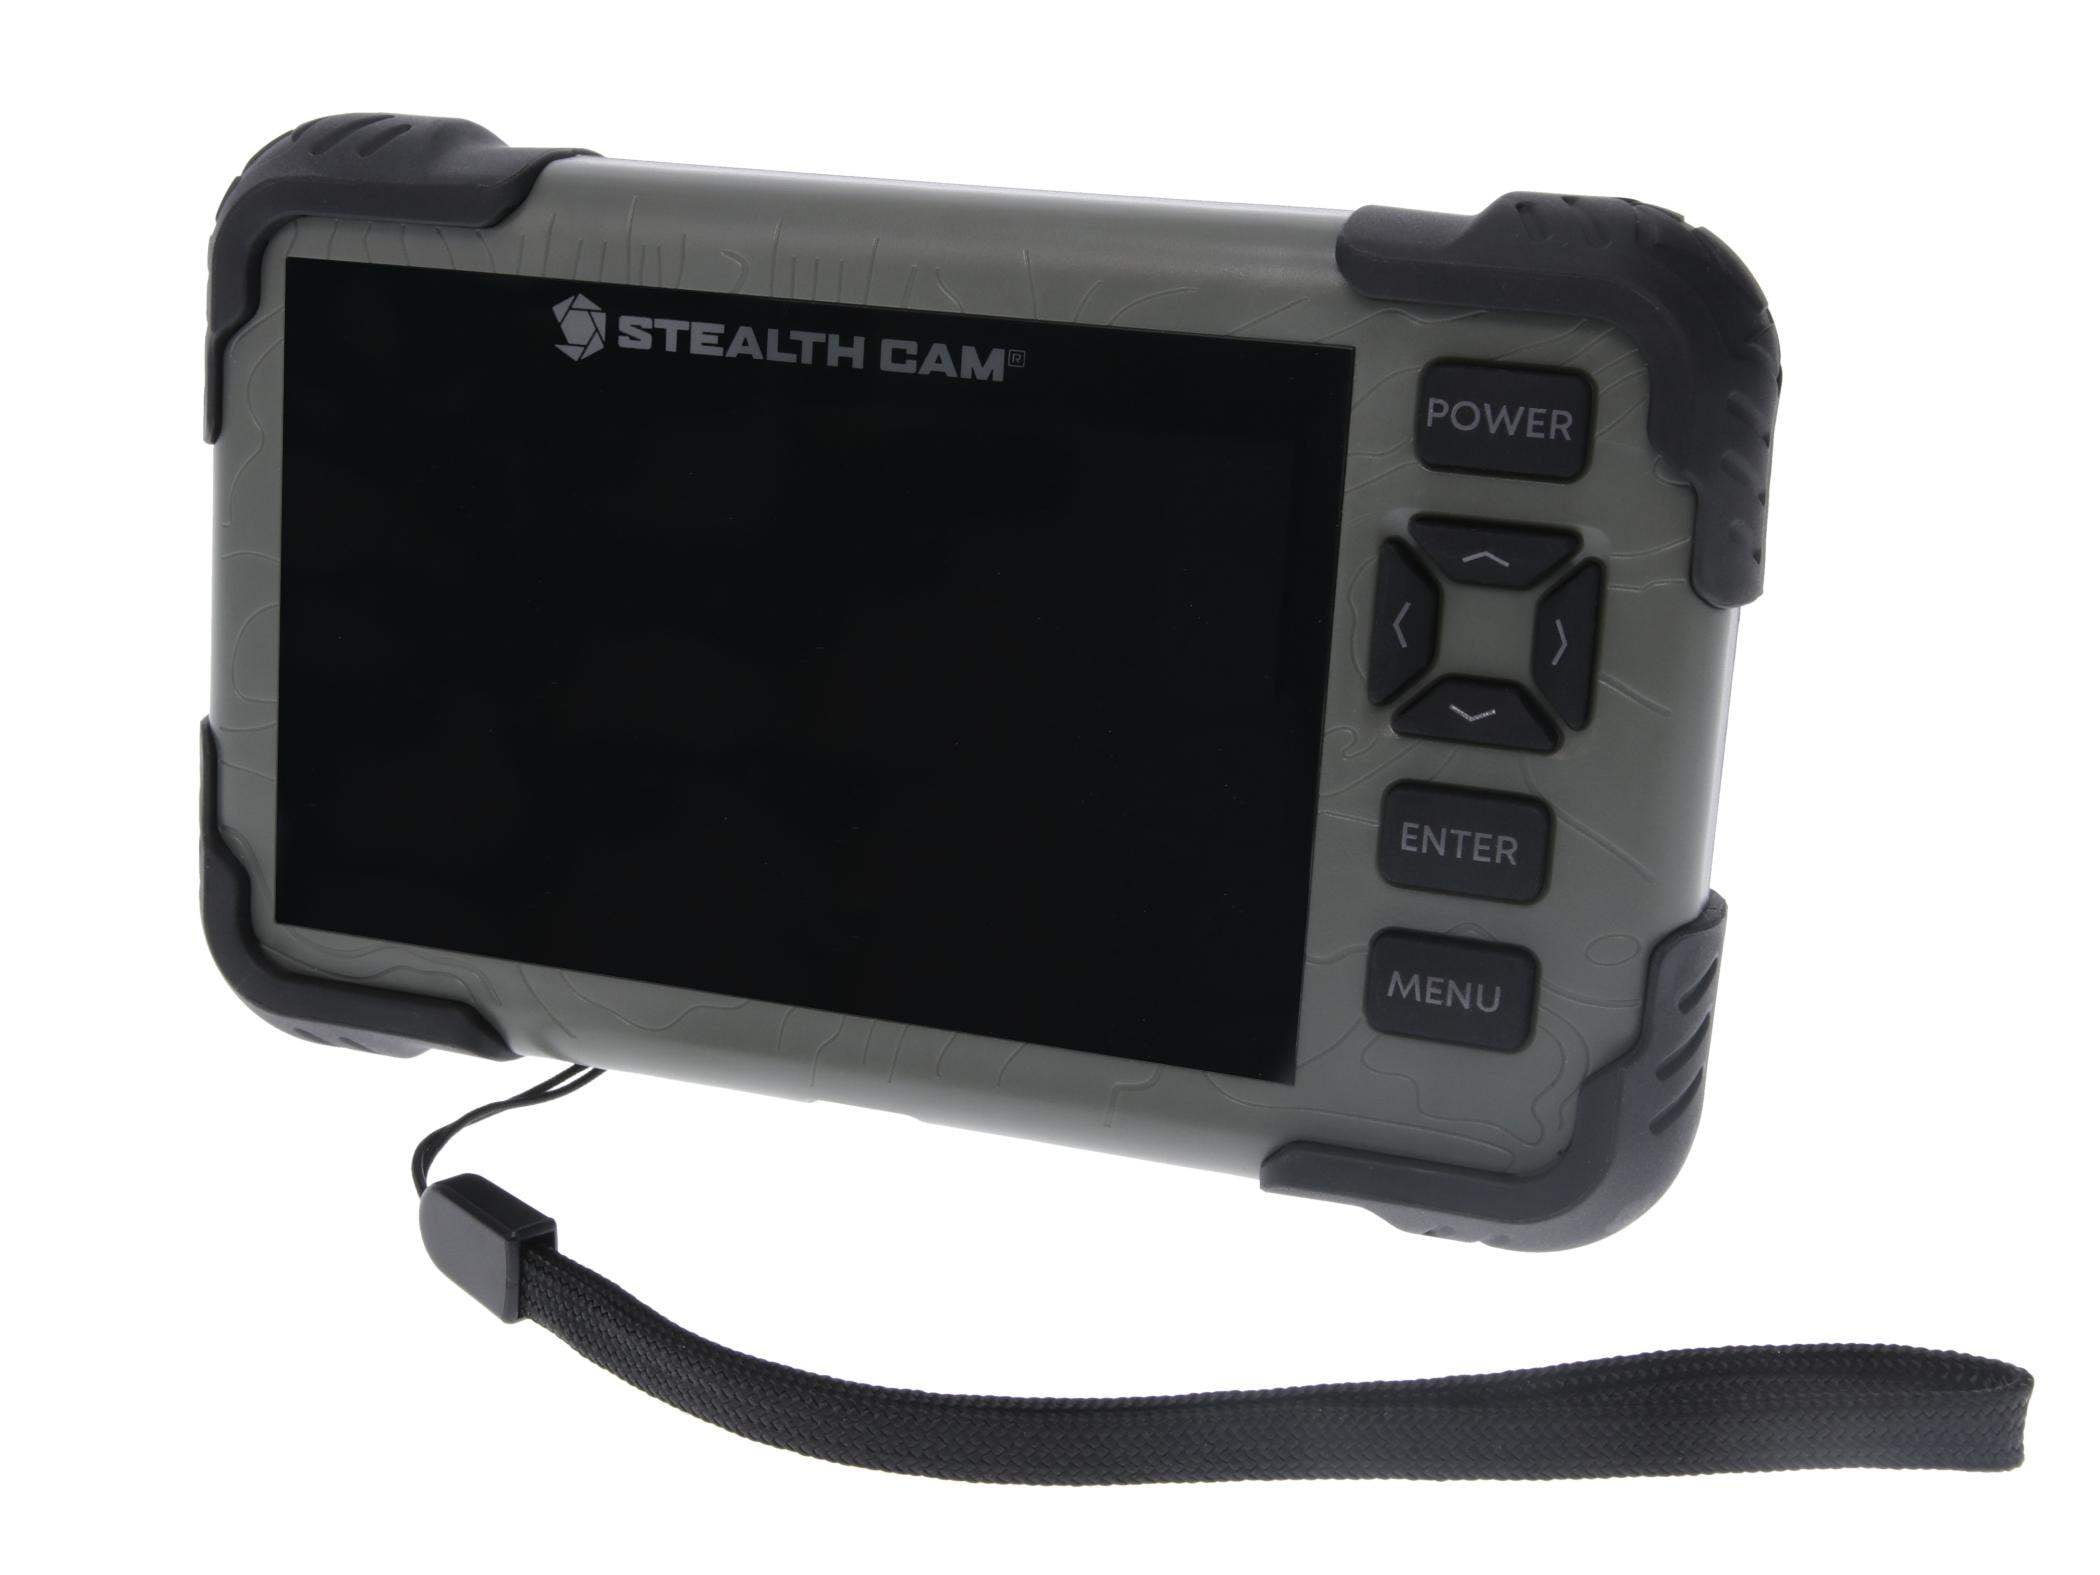 Hard Travel Case for Stealth Cam SD Card Reader Viewer with shockproof dustproof 